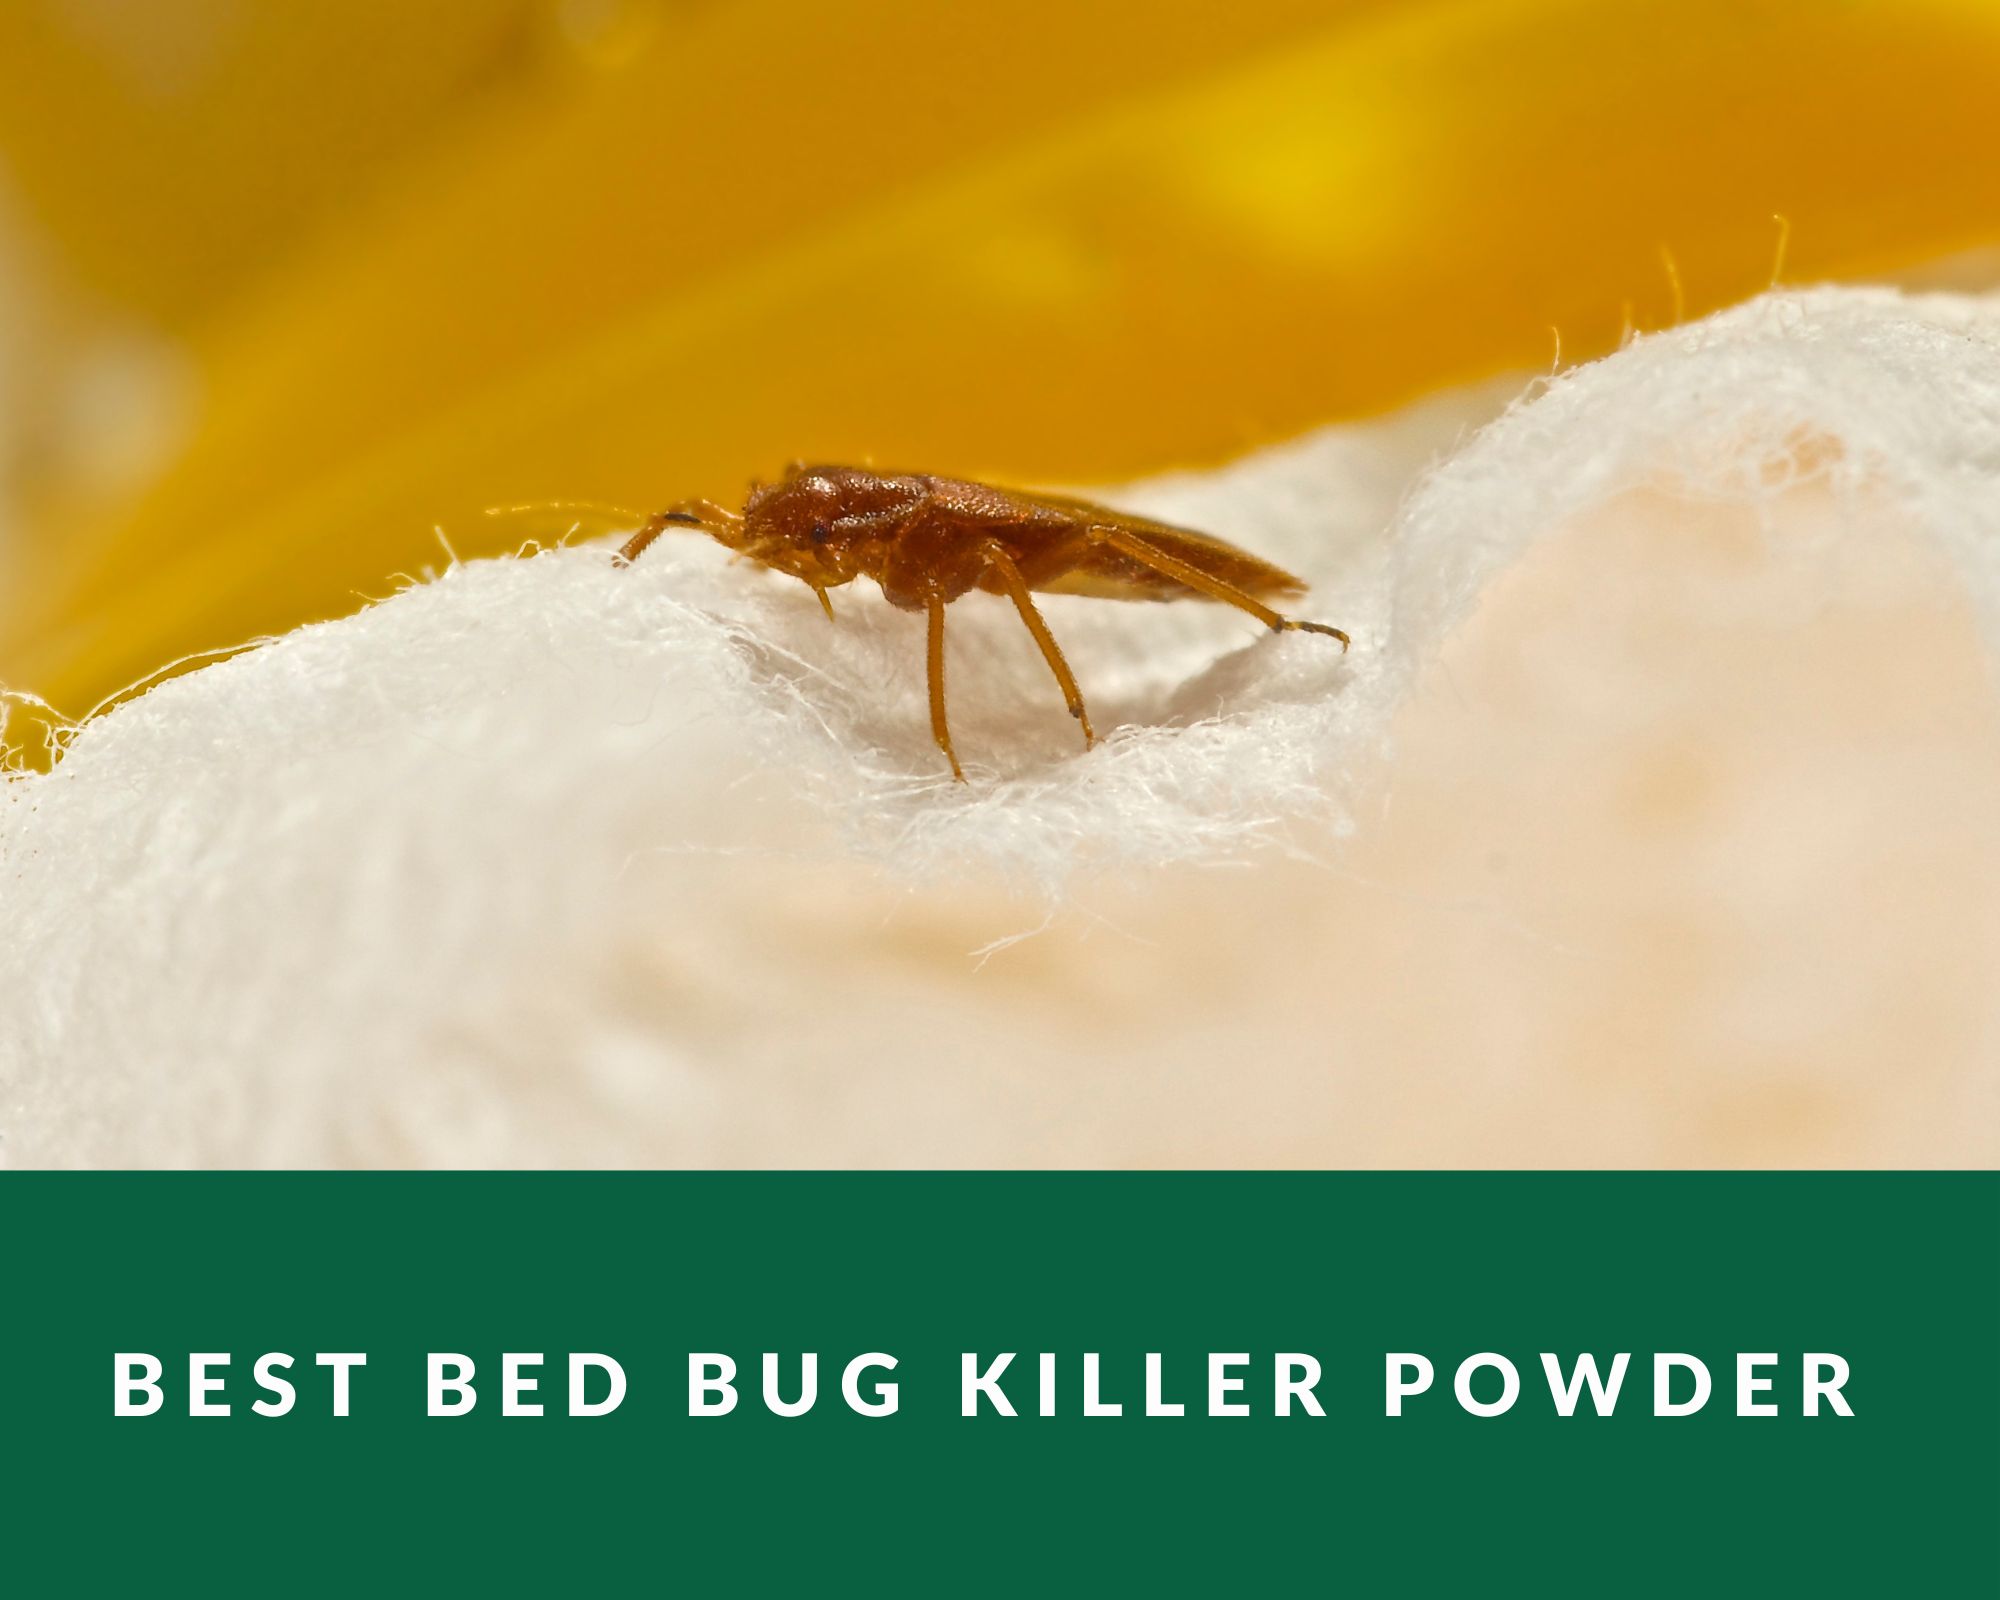 Powder for Bed Bugs